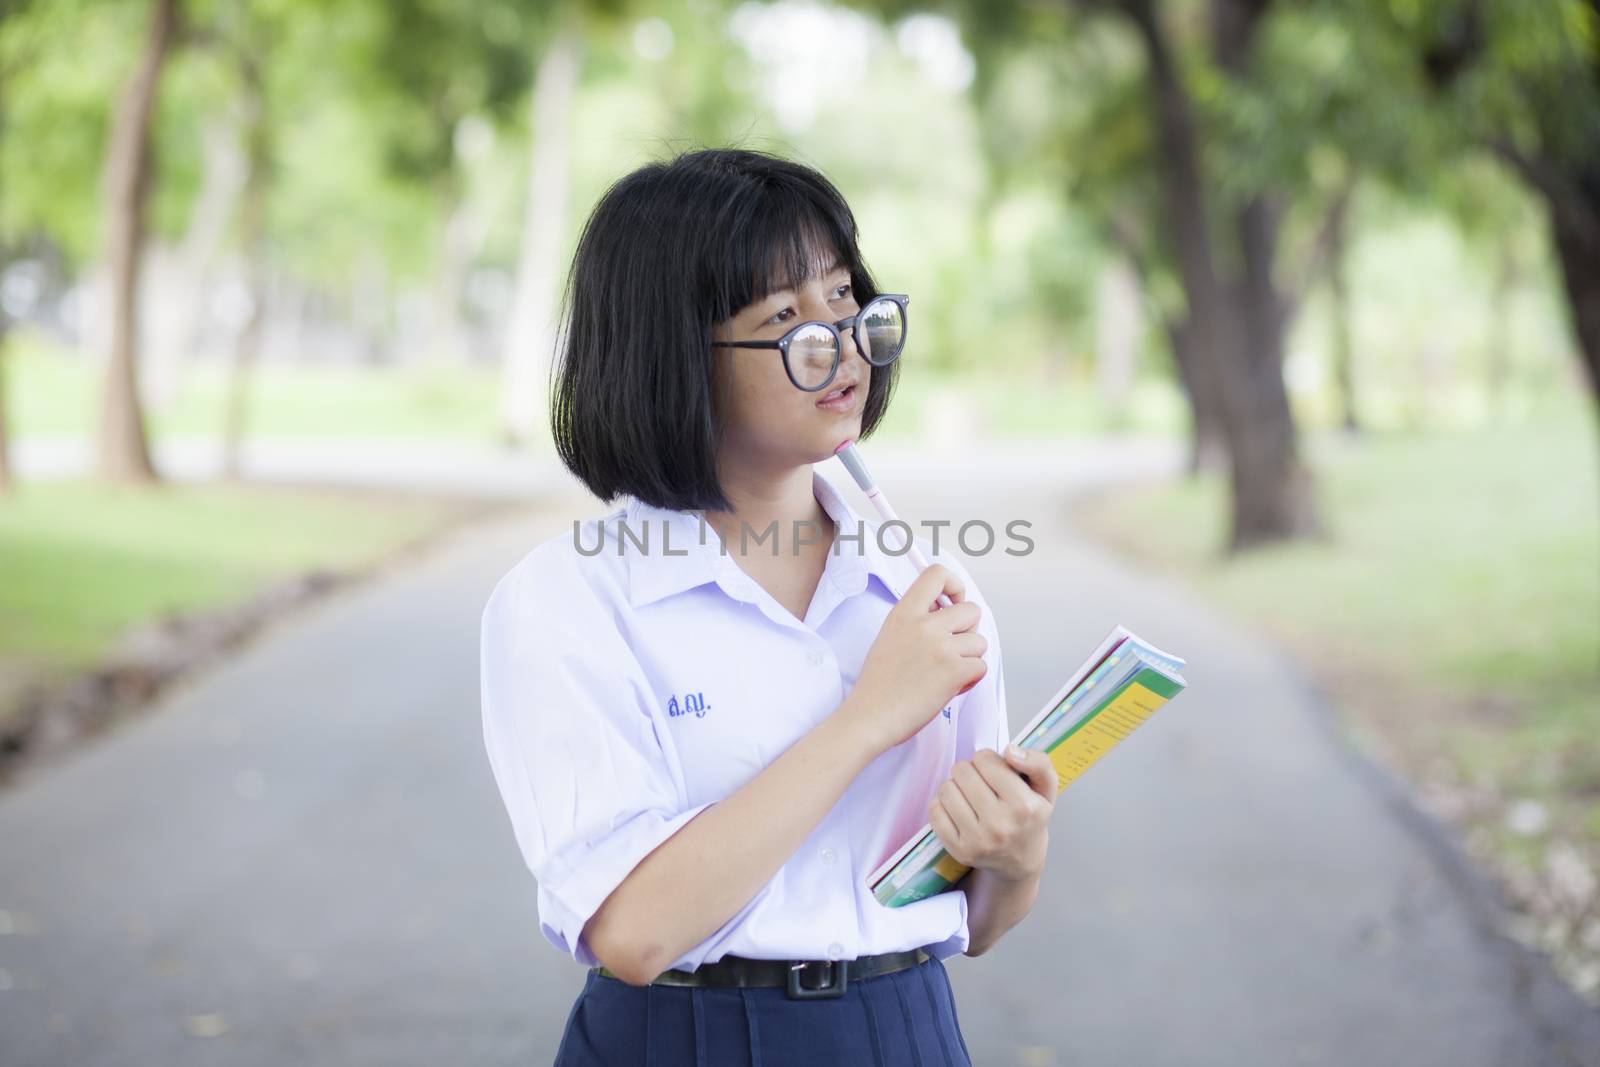 Schoolgirl standing holding a book. Relaxed, smiling and happy. In the park